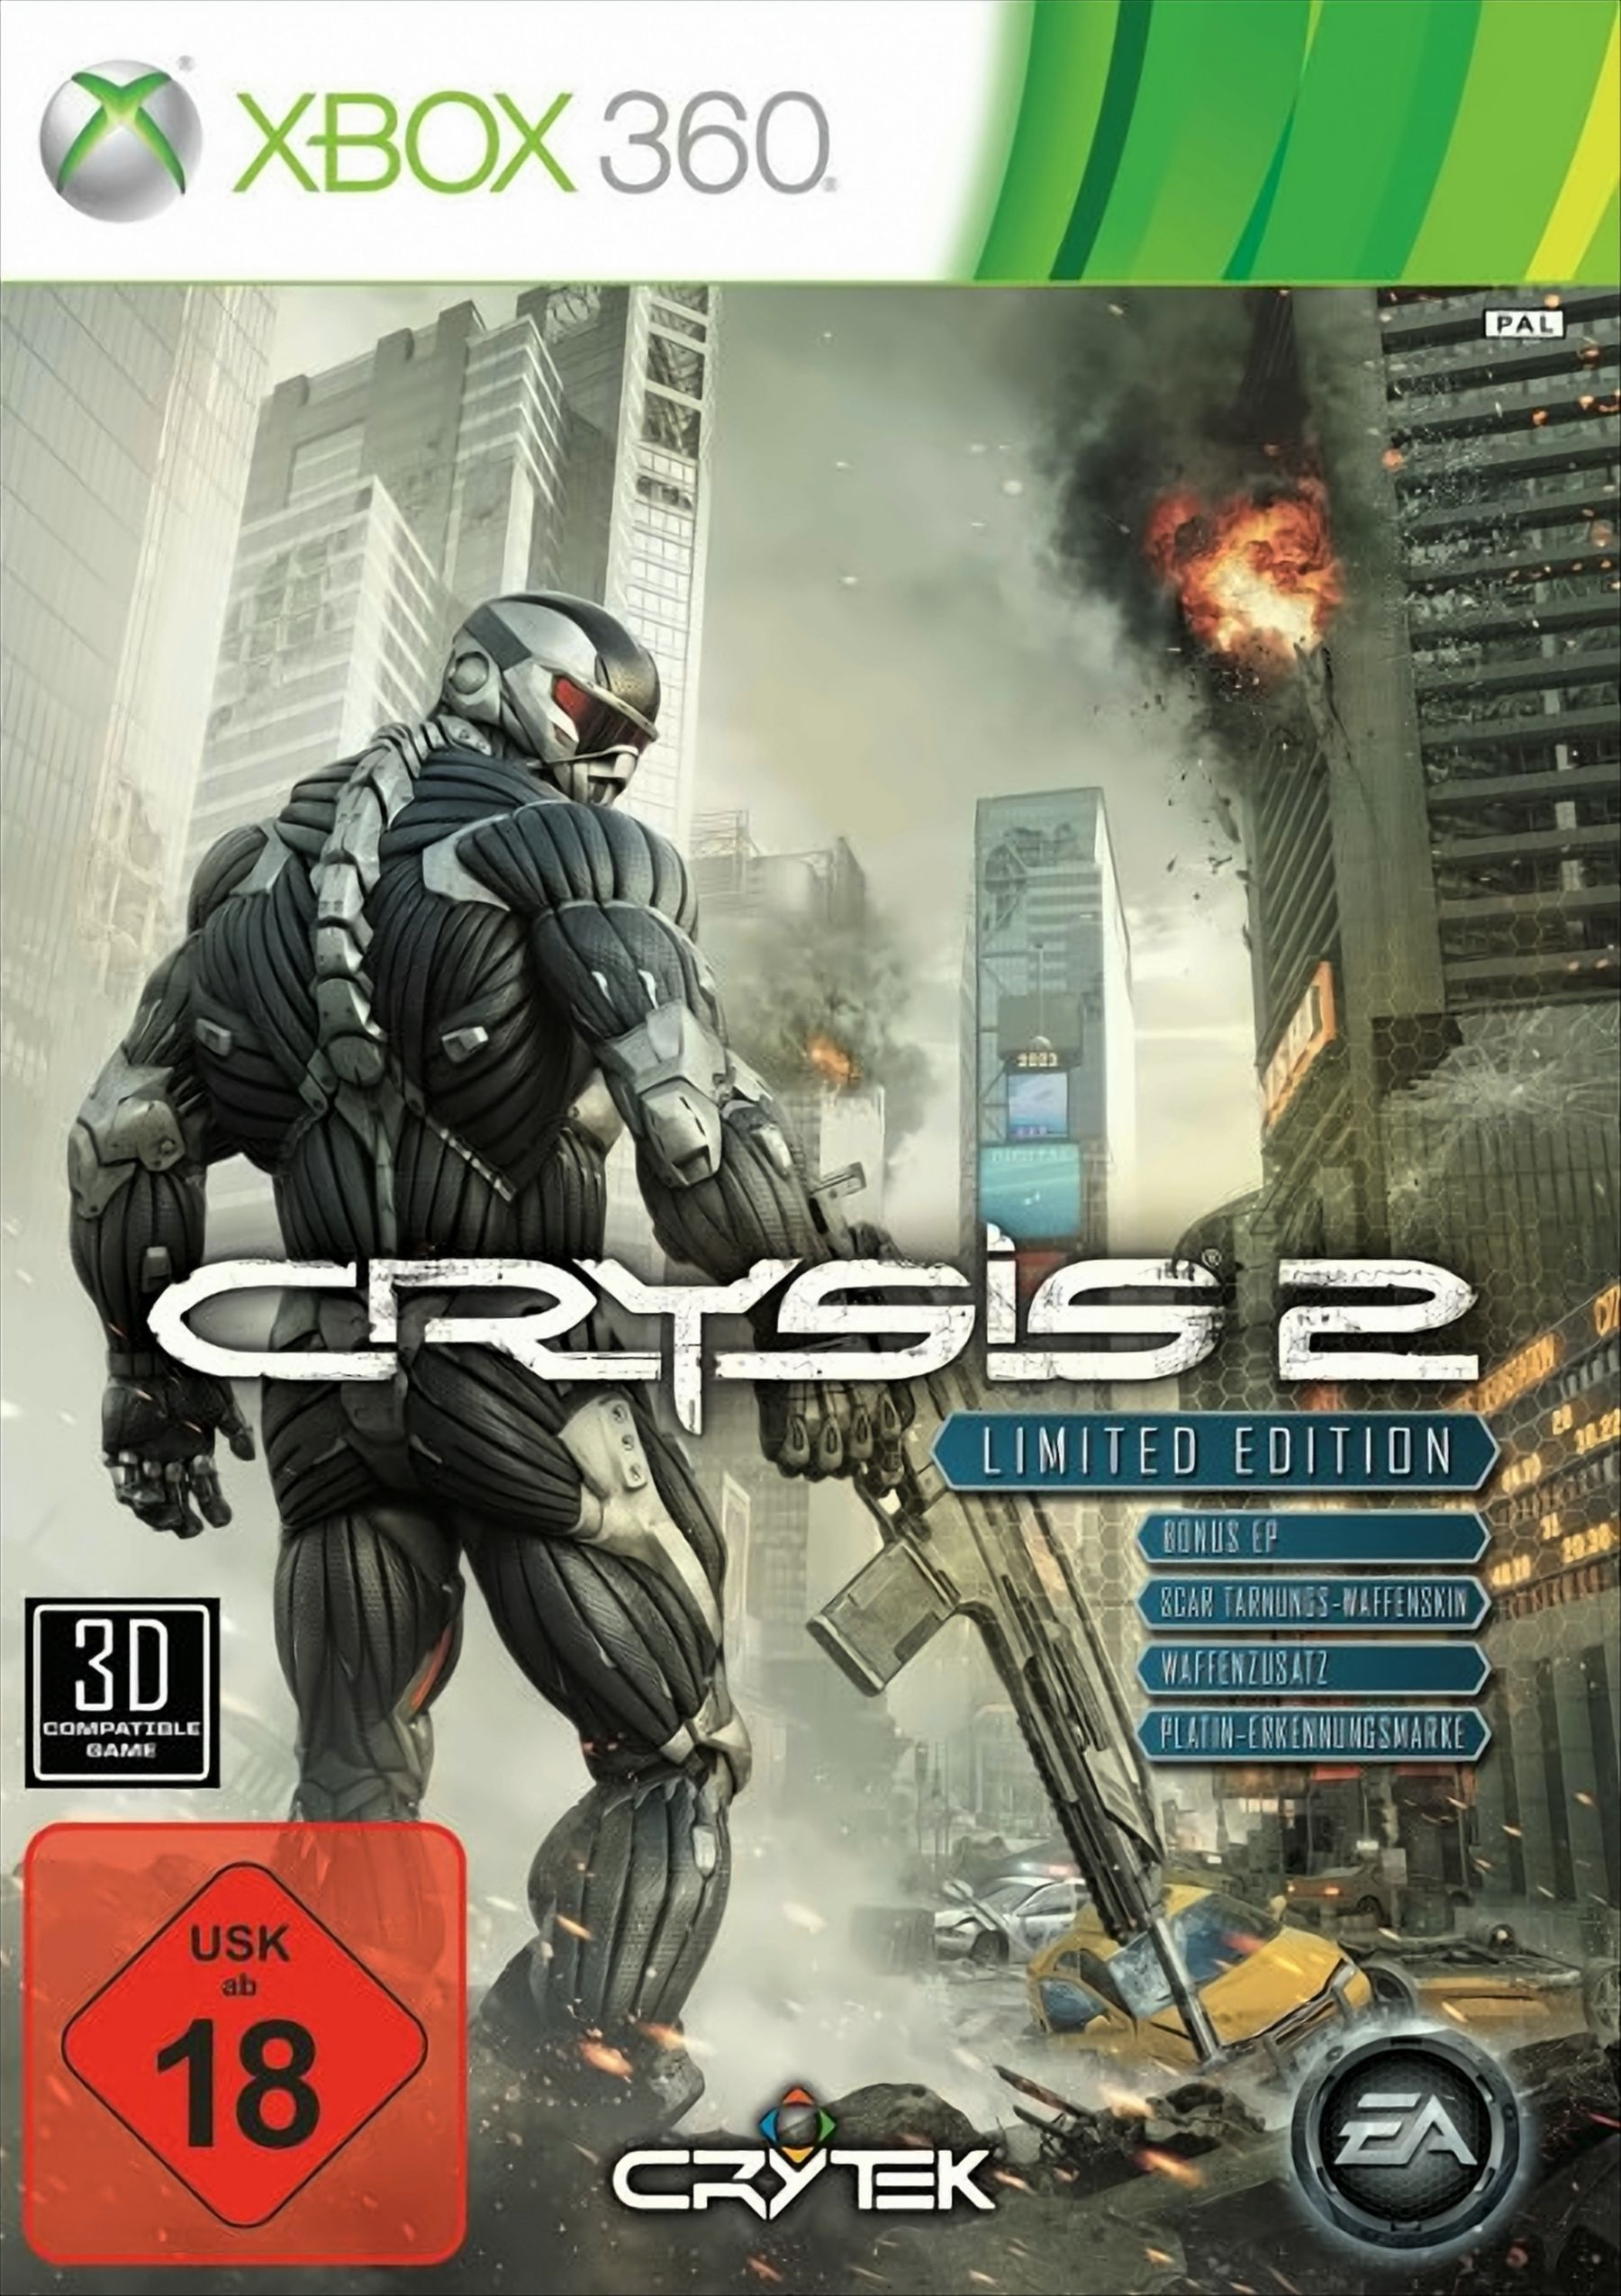 360] [Xbox Edition 2 Crysis - Limited -